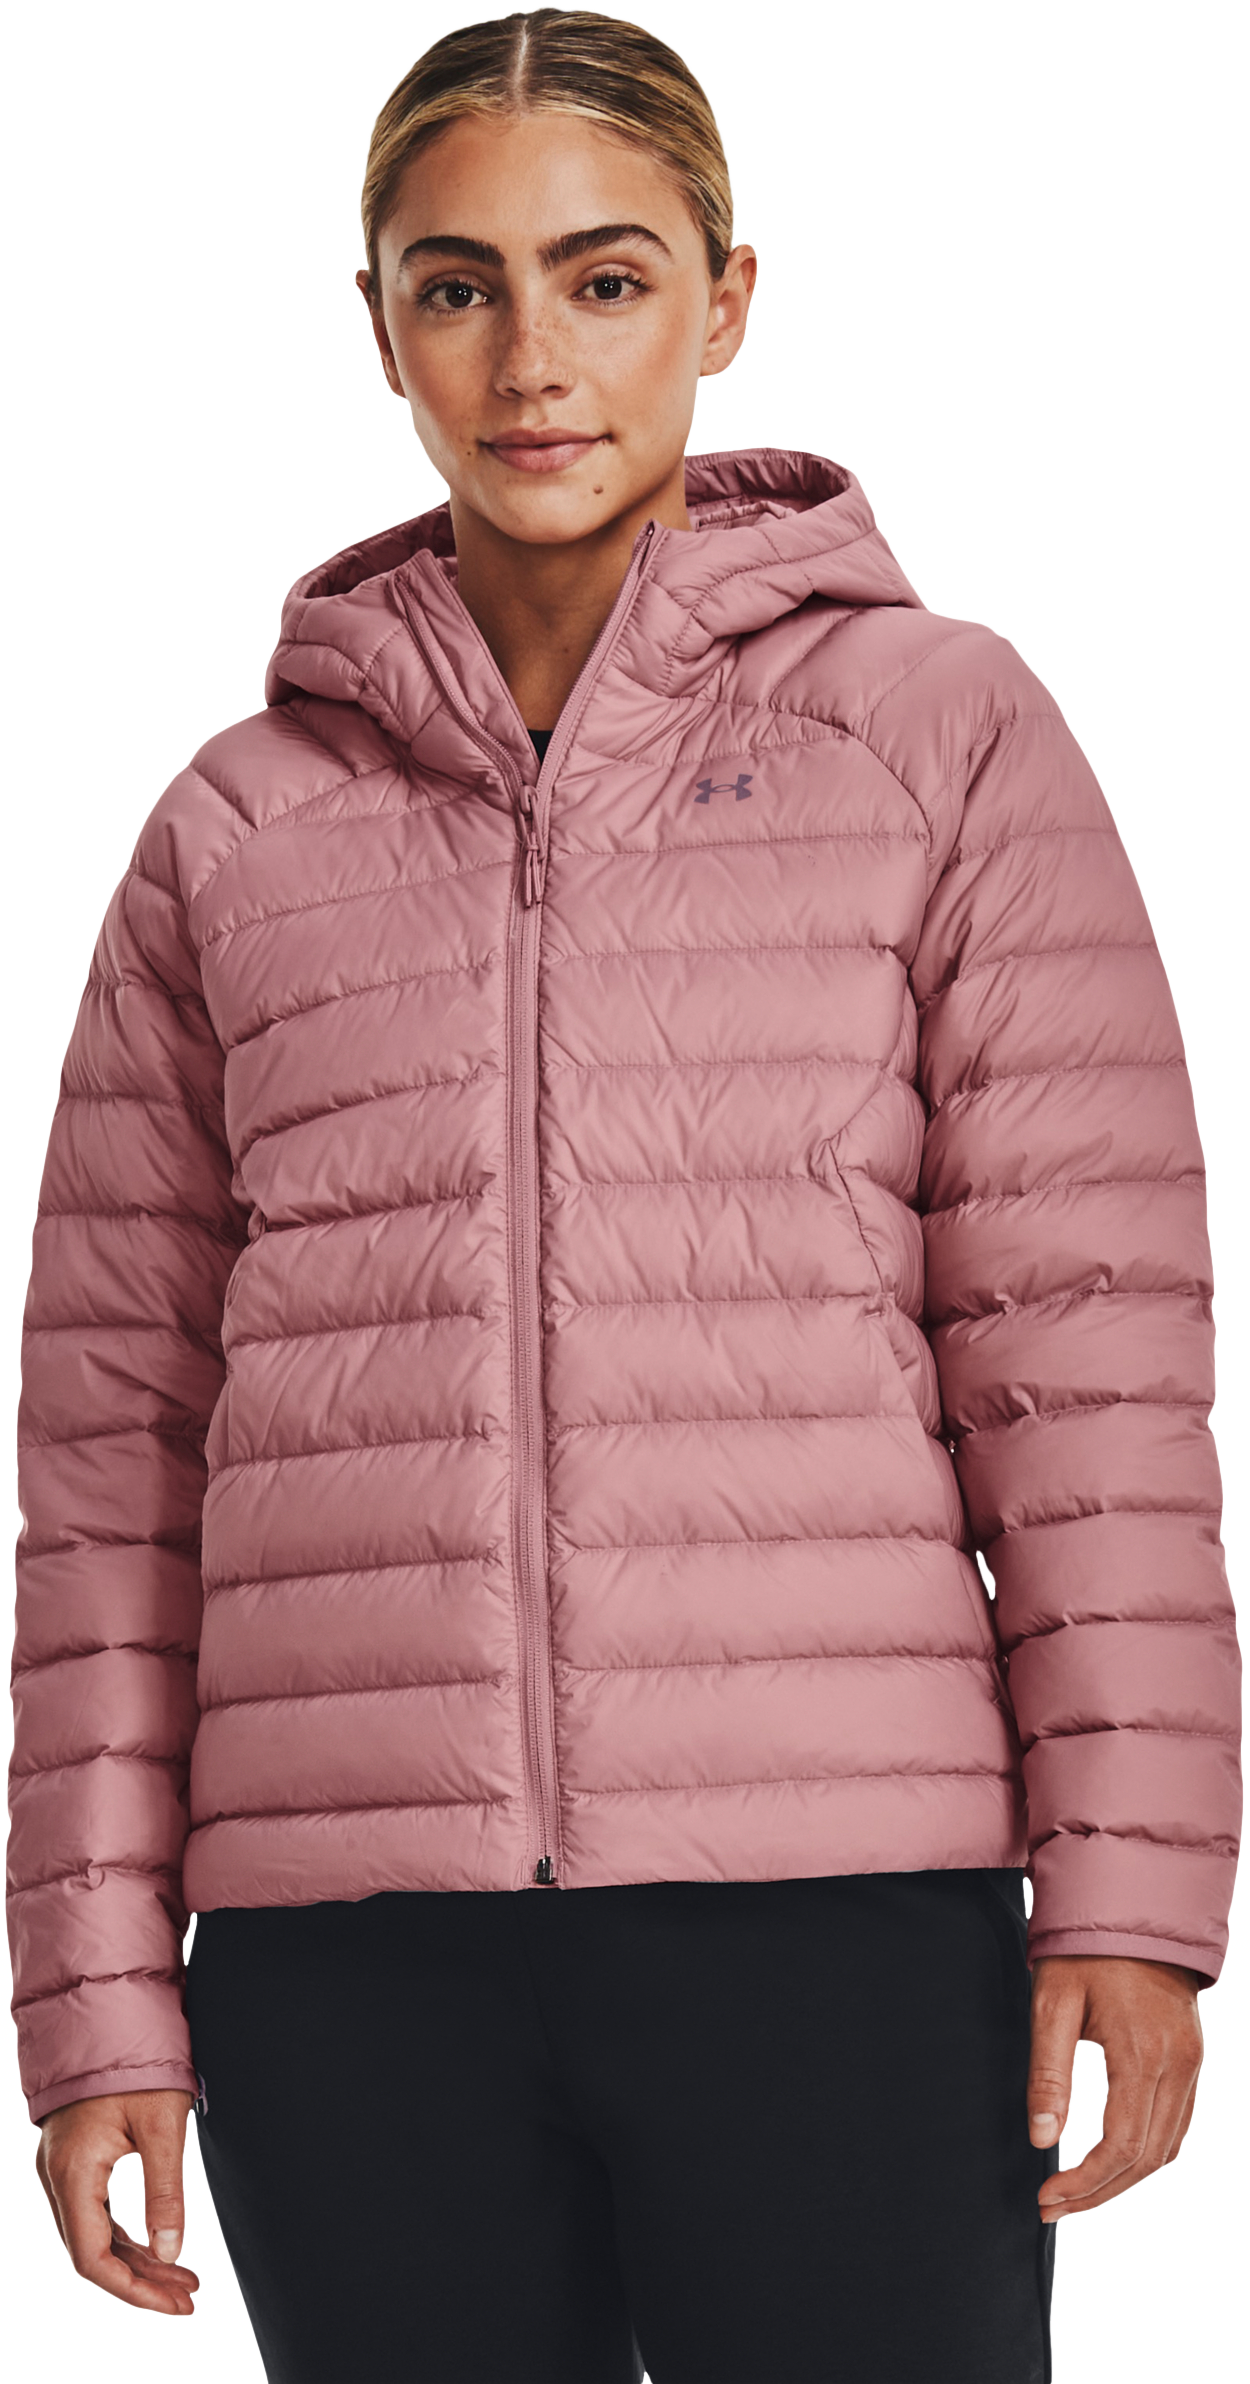 Under Armour - Womens Armour Down 2.0 Jacket, Color Pink Fog